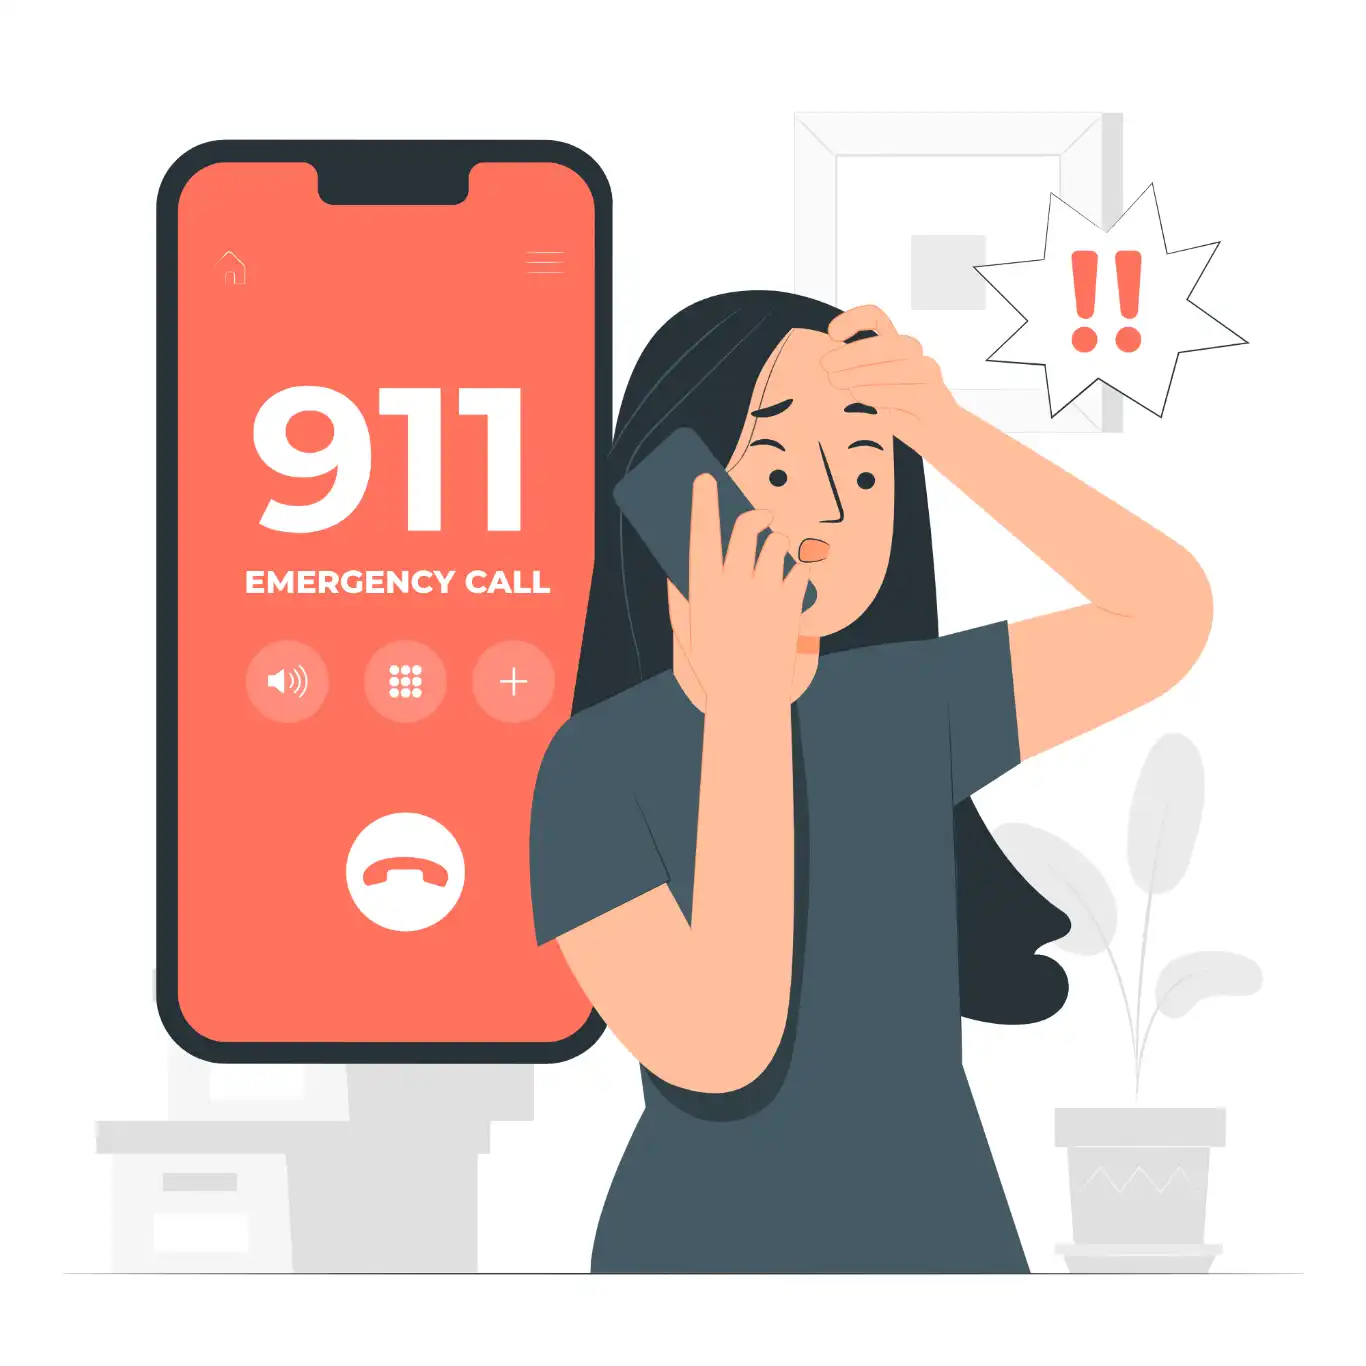 "A woman in distress making an emergency 911 call on her phone, with a large smartphone screen displaying the number 911.